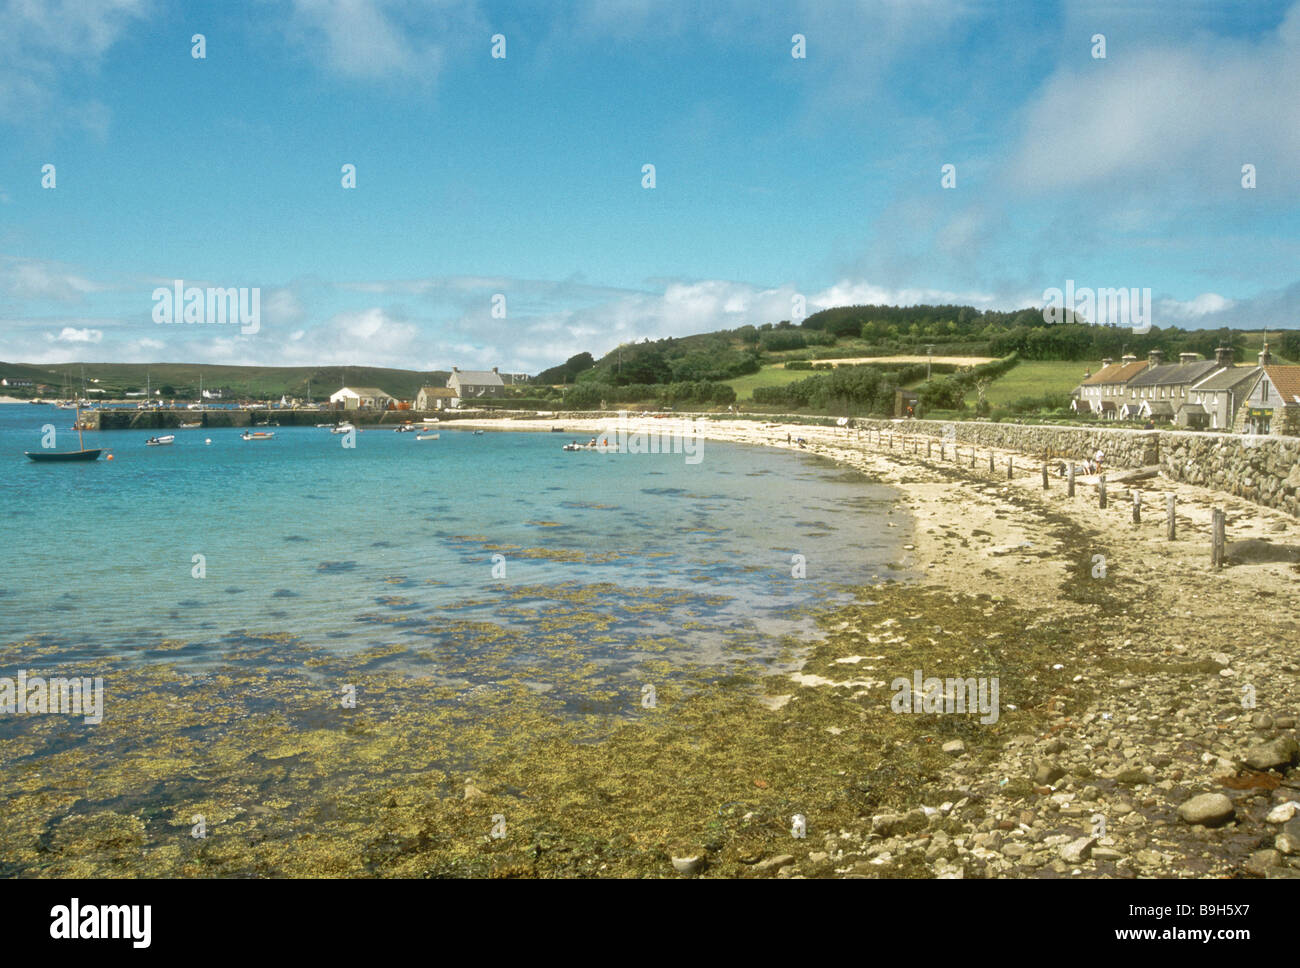 The beach and quay at New Grimsby on Tresco island Isles of Scilly England UK Stock Photo